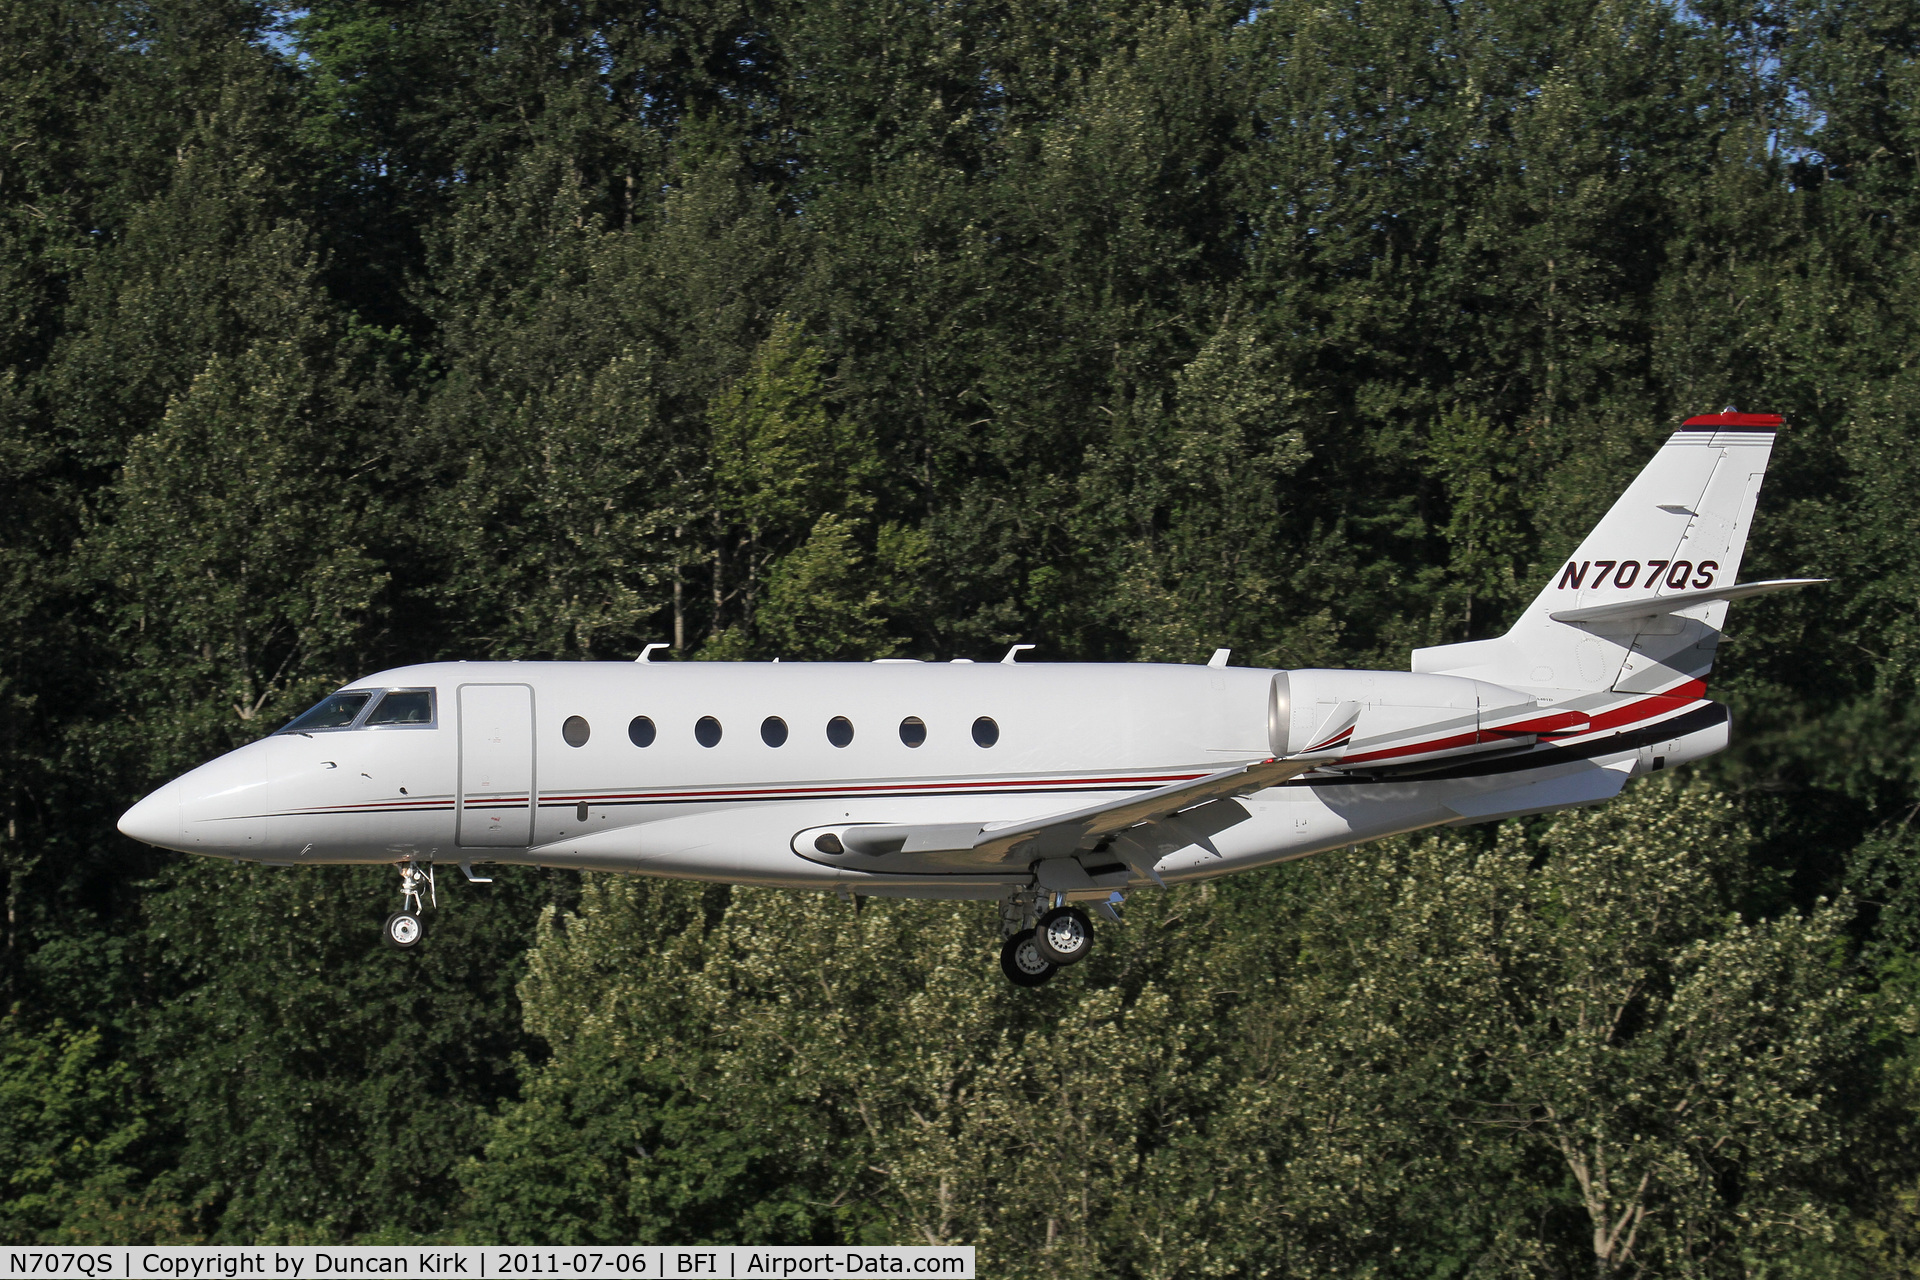 N707QS, 2002 Israel Aircraft Industries Gulfstream 200 C/N 066, A rather ugly looking business jet